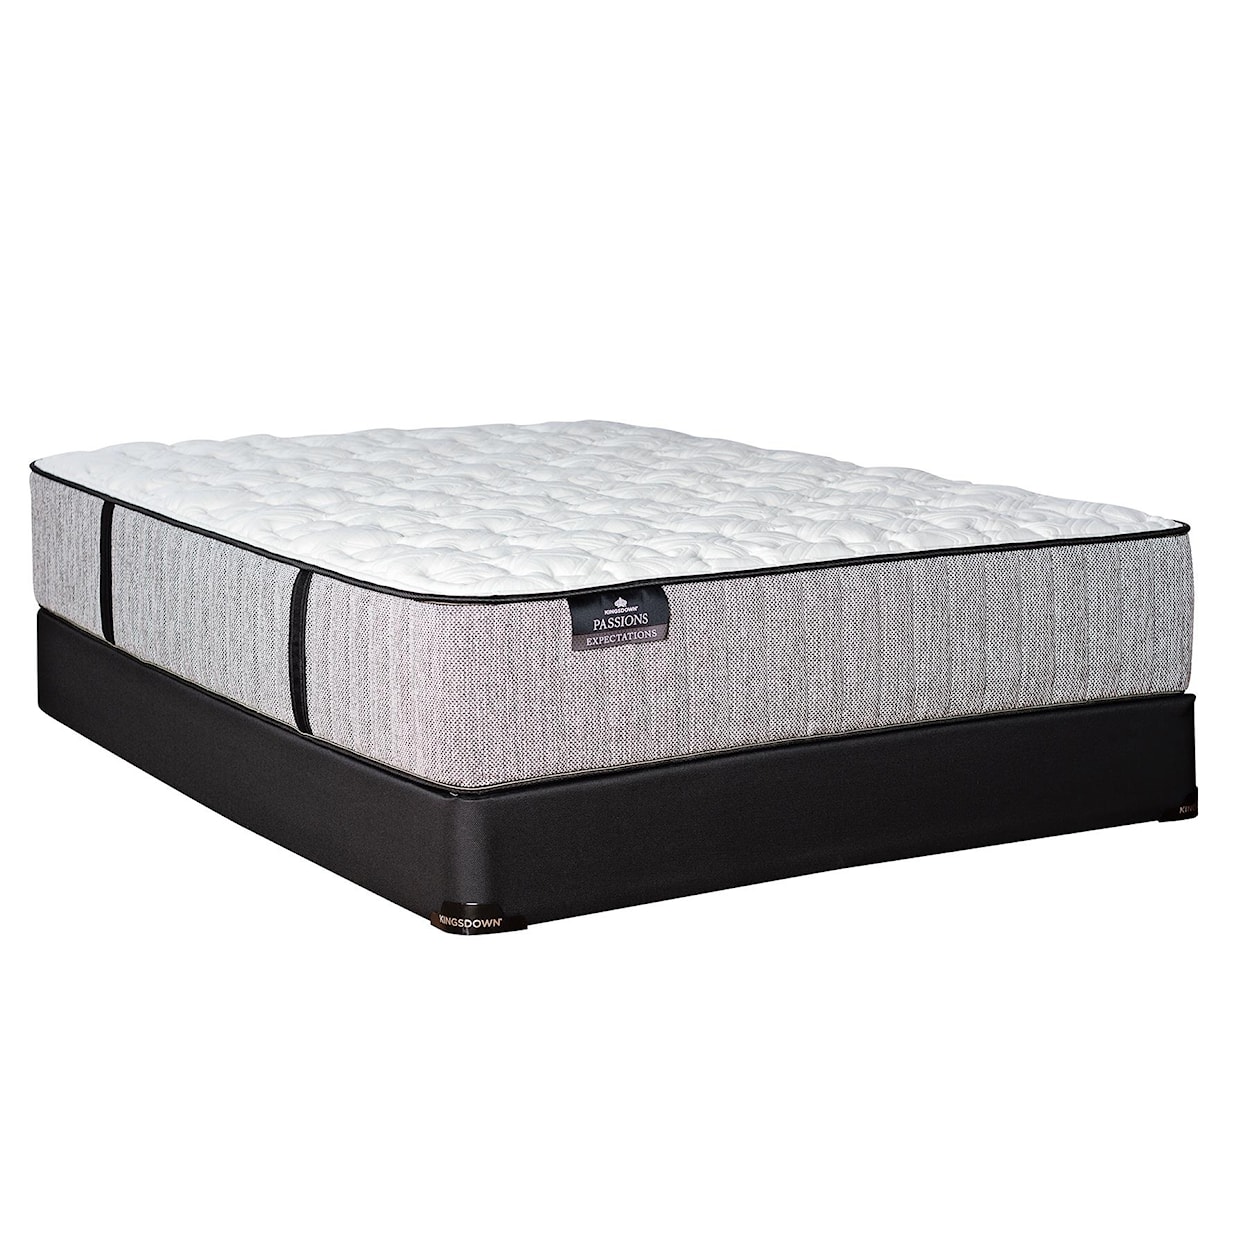 Kingsdown Passions Expectations King 13 1/4" Firm Mattress